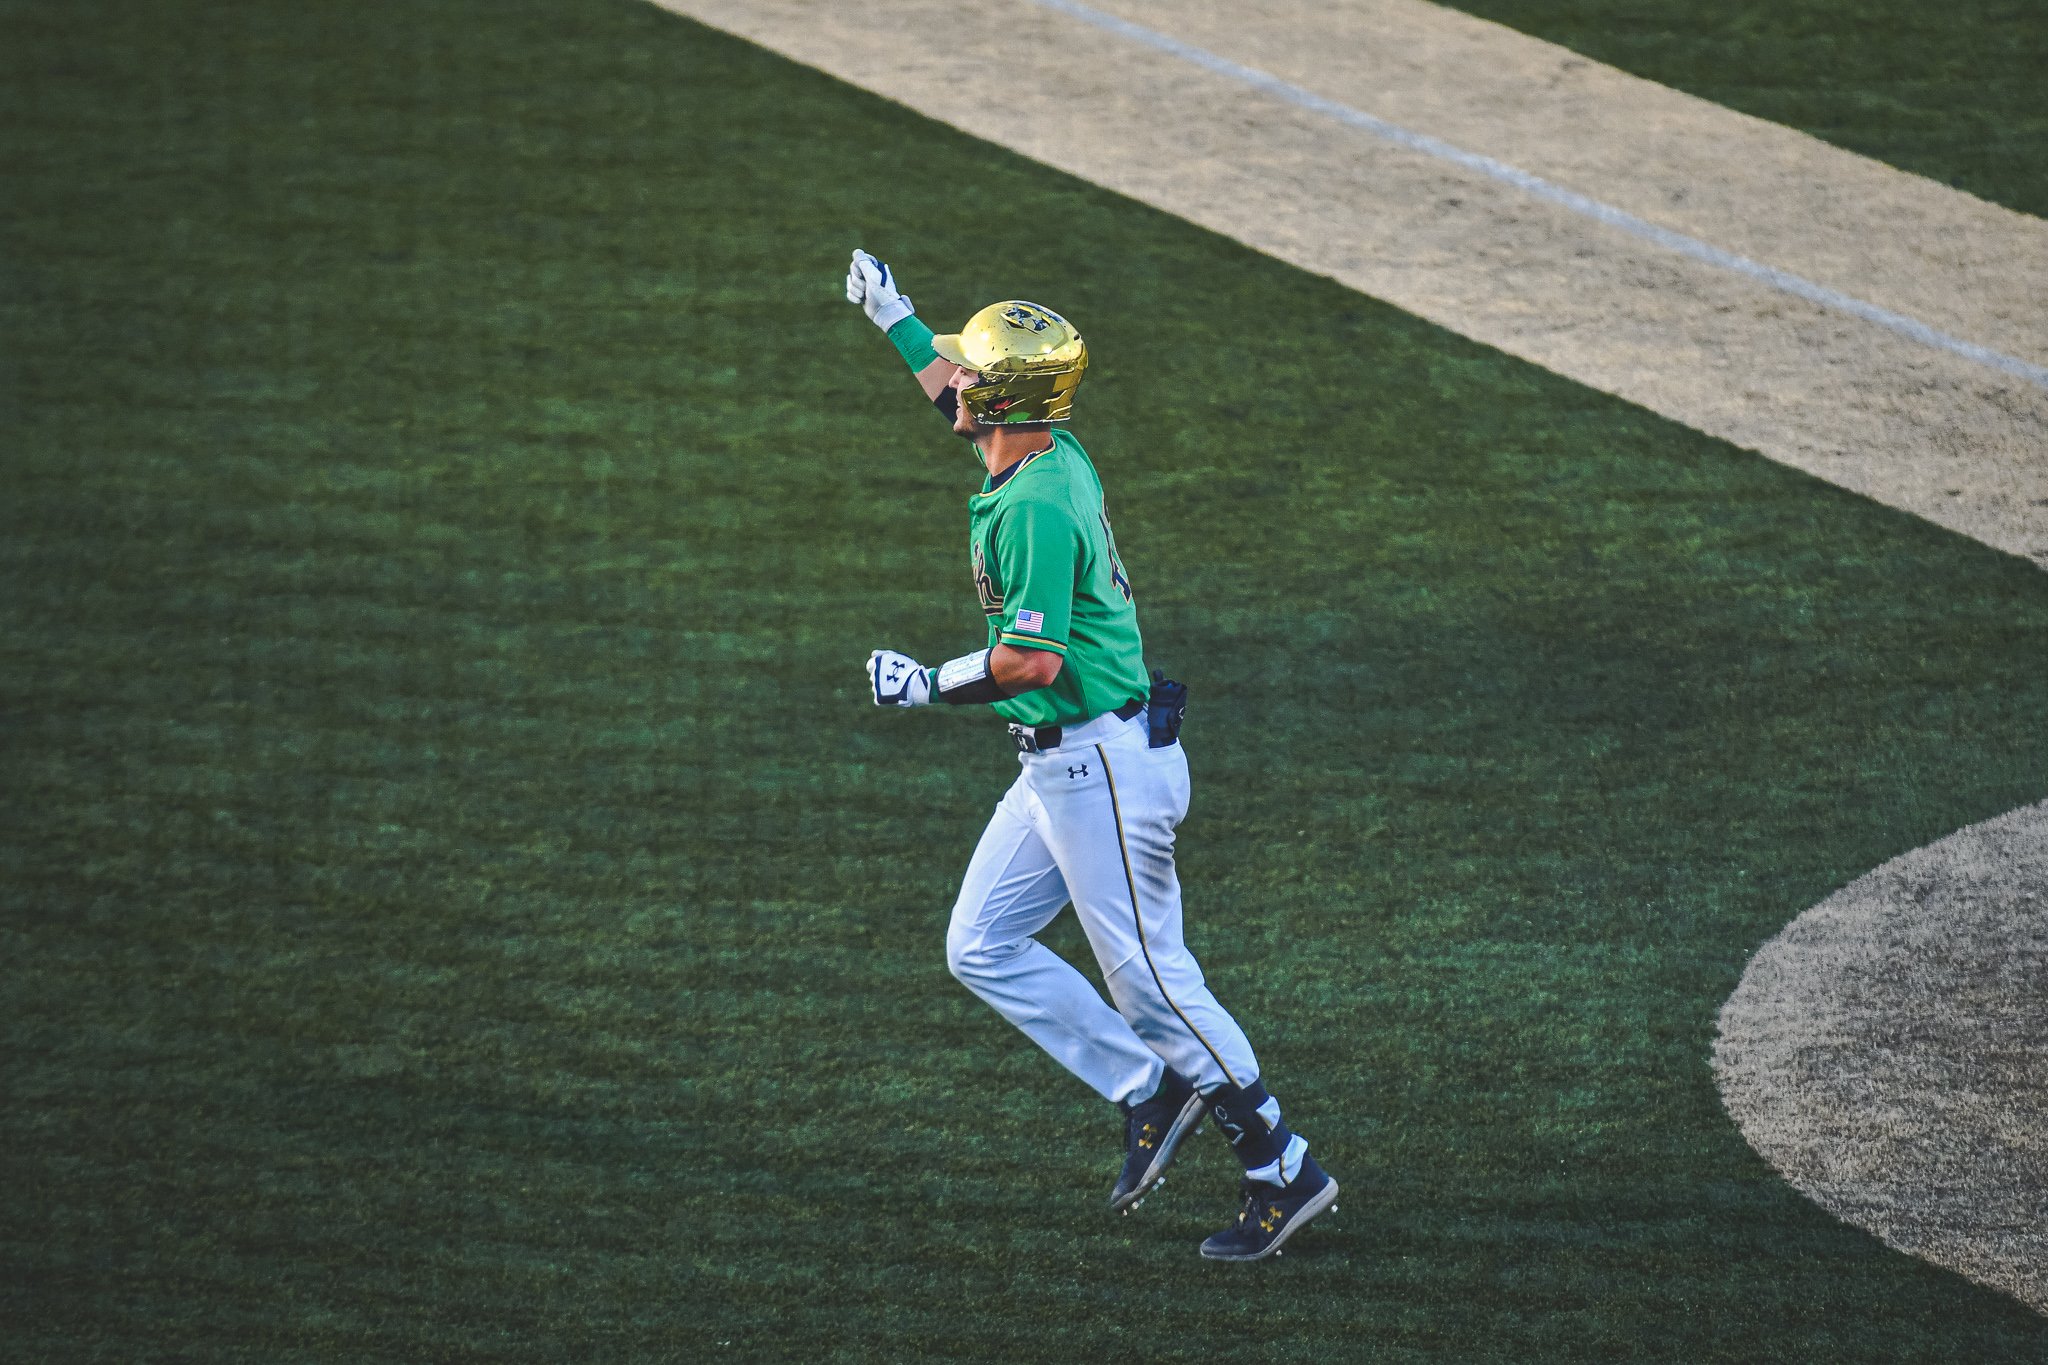 Notre Dame Baseball on Twitter: BOT 8  HOME RUN DERBY CONTINUES AT ECK!!!  @br00ks23 sends a two-run blast to left!!! ND 12, CMU 2 #GoIrish x #Rally   / Twitter